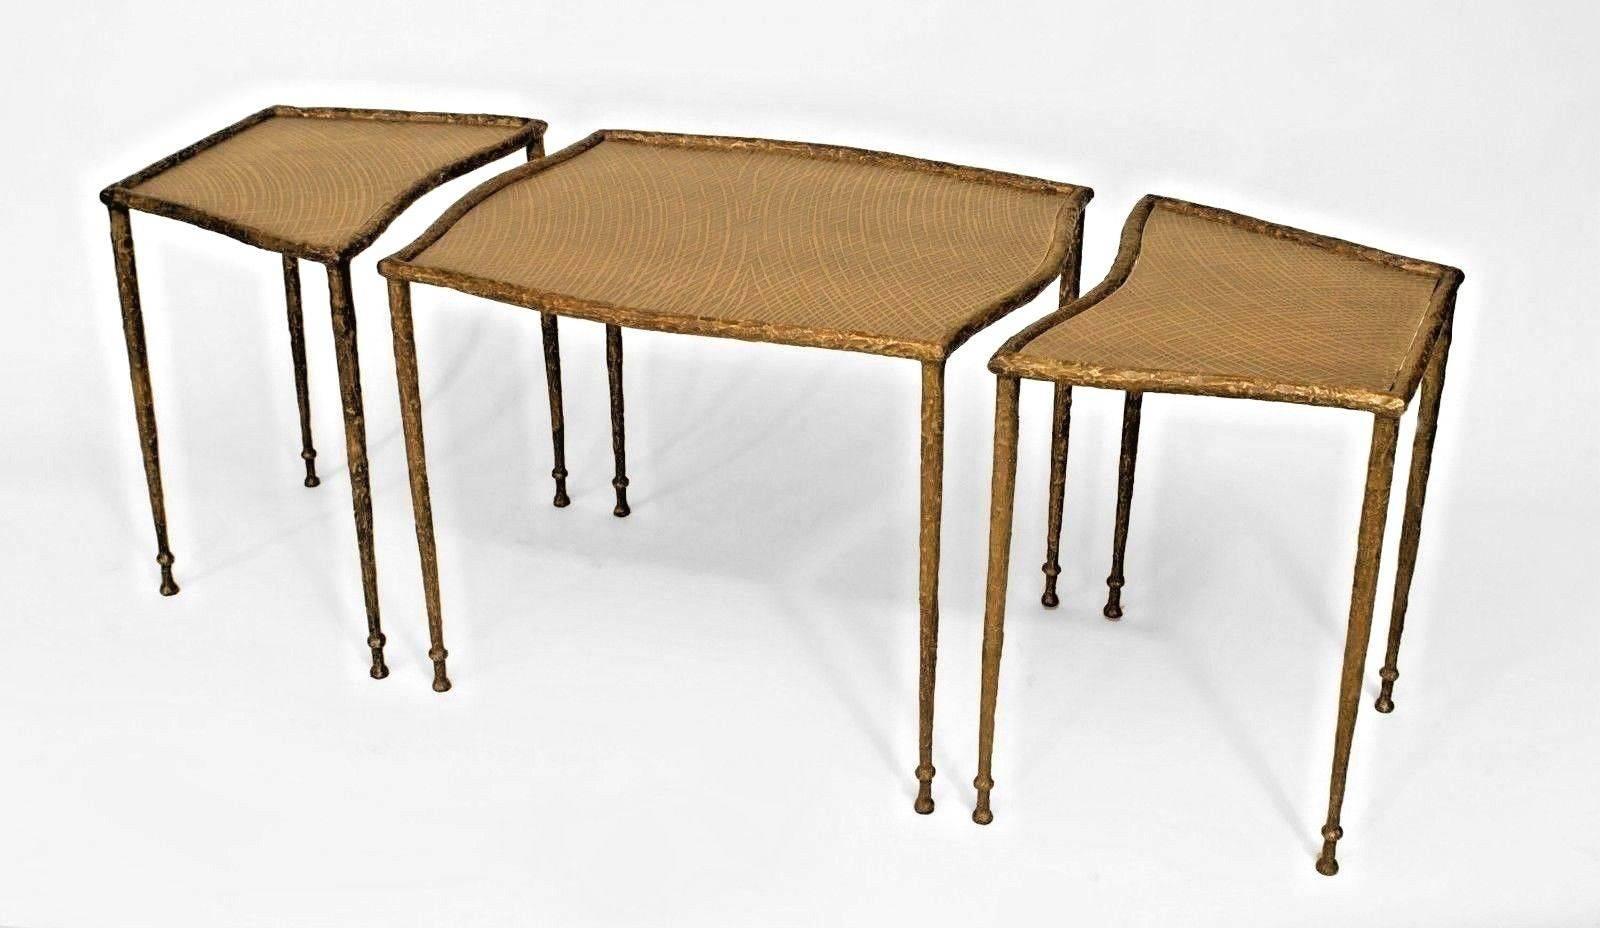 Patinated bronze three-section coffee table with four bronze legs on each section with hand detailed bronze tops.
